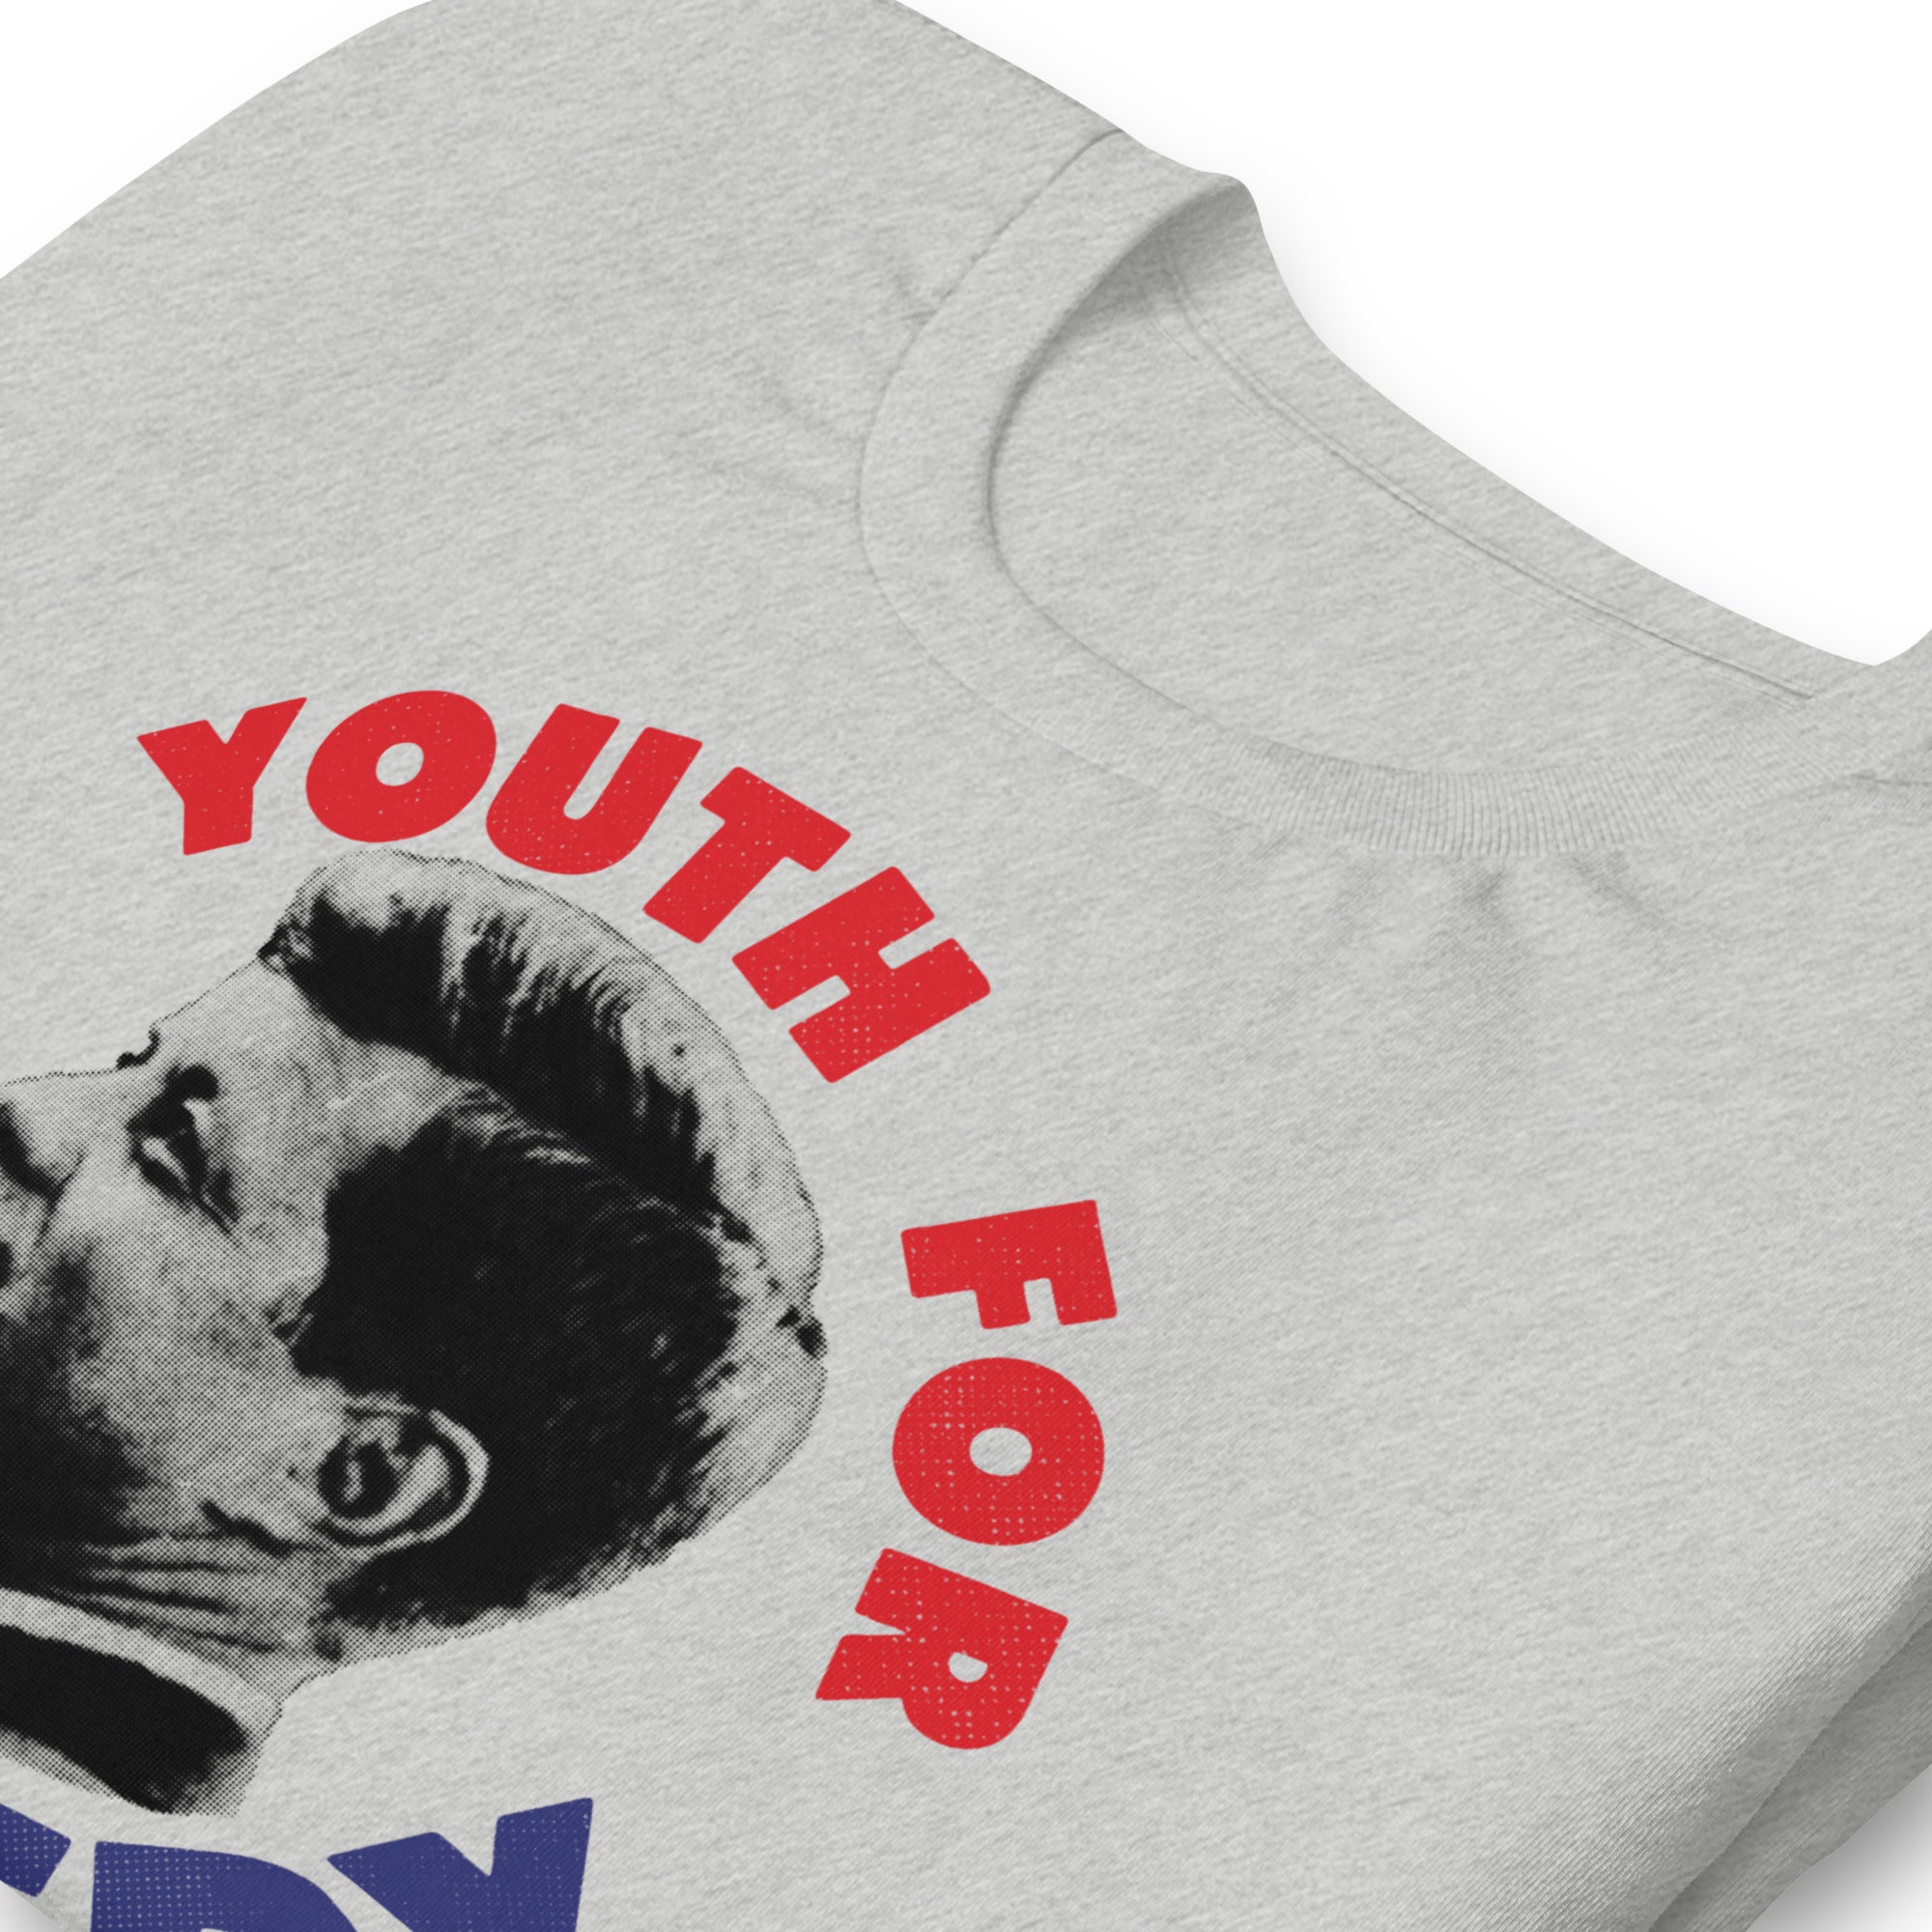 Youth For Kennedy Retro Campaign T-Shirt